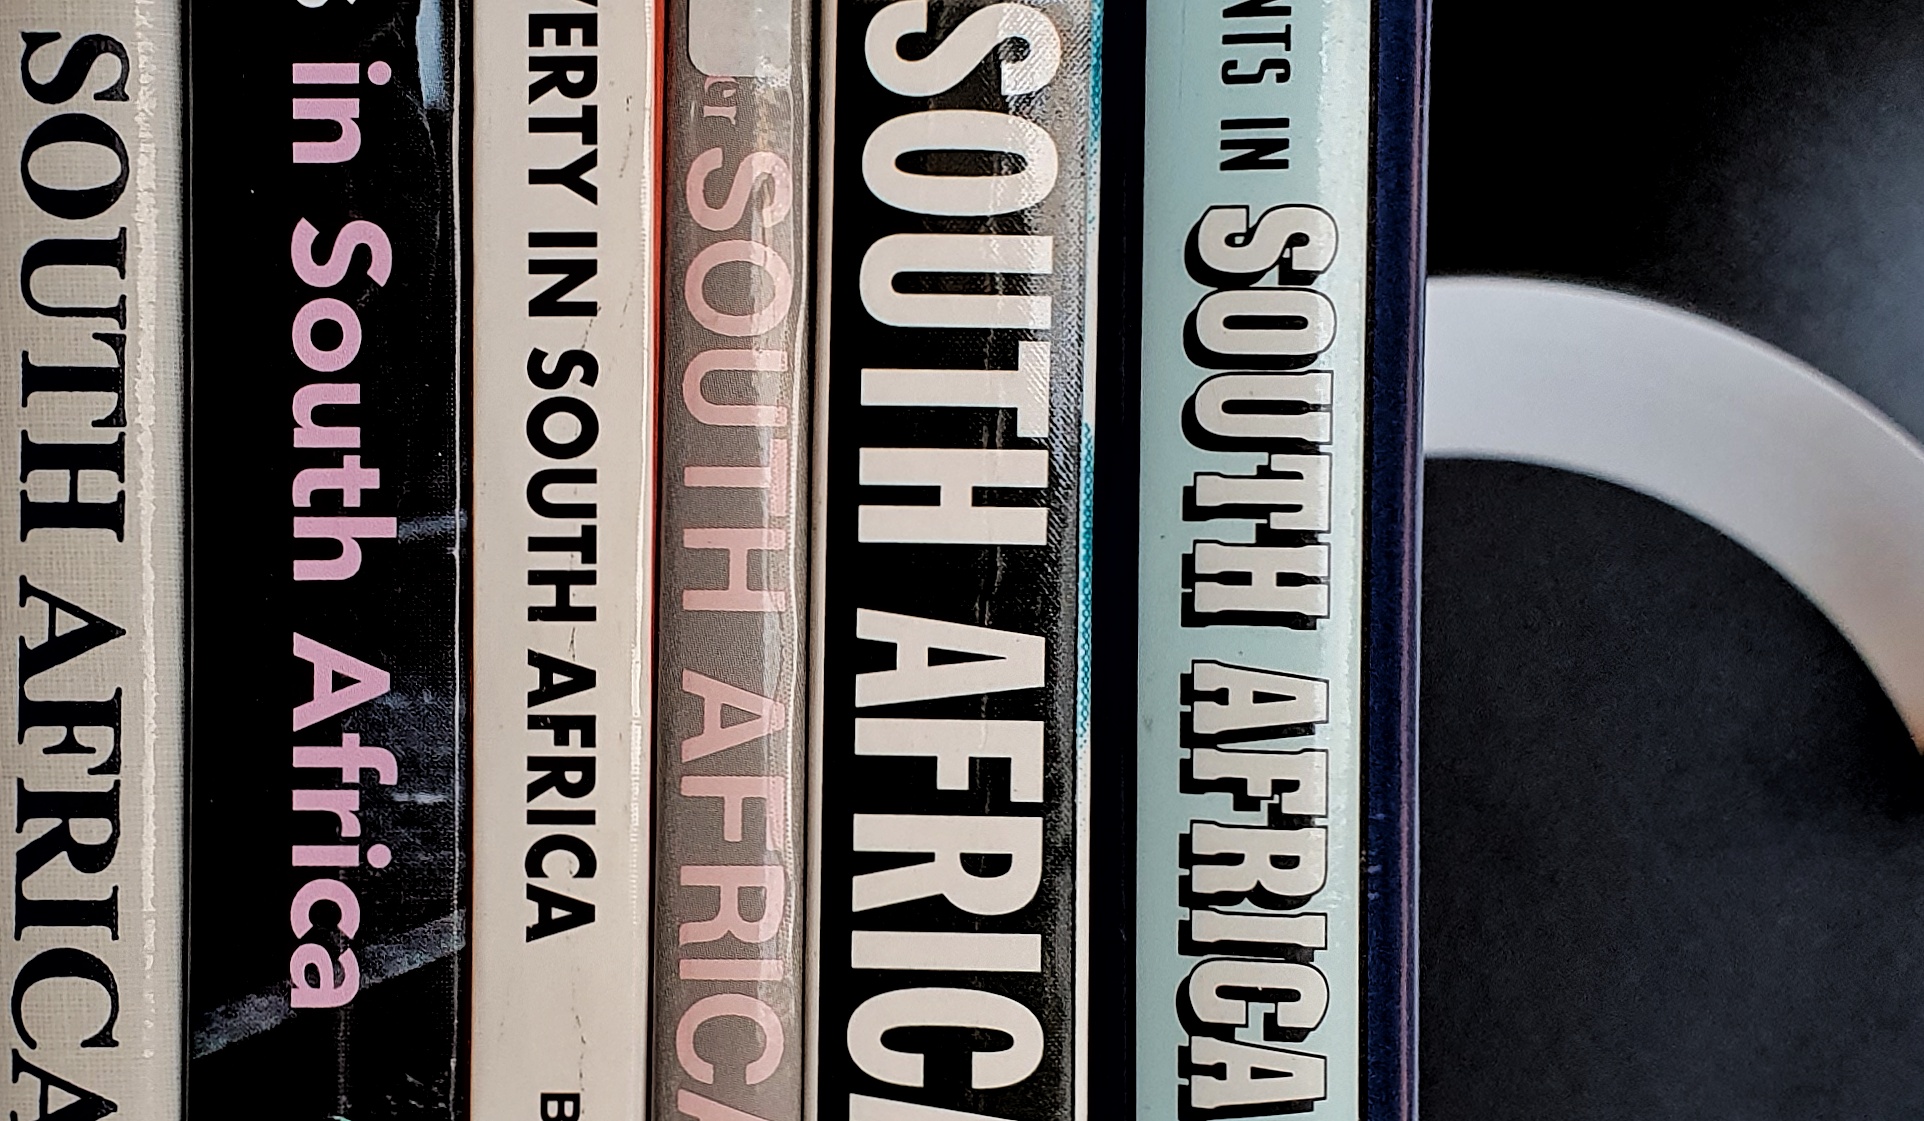 Books on South Africa